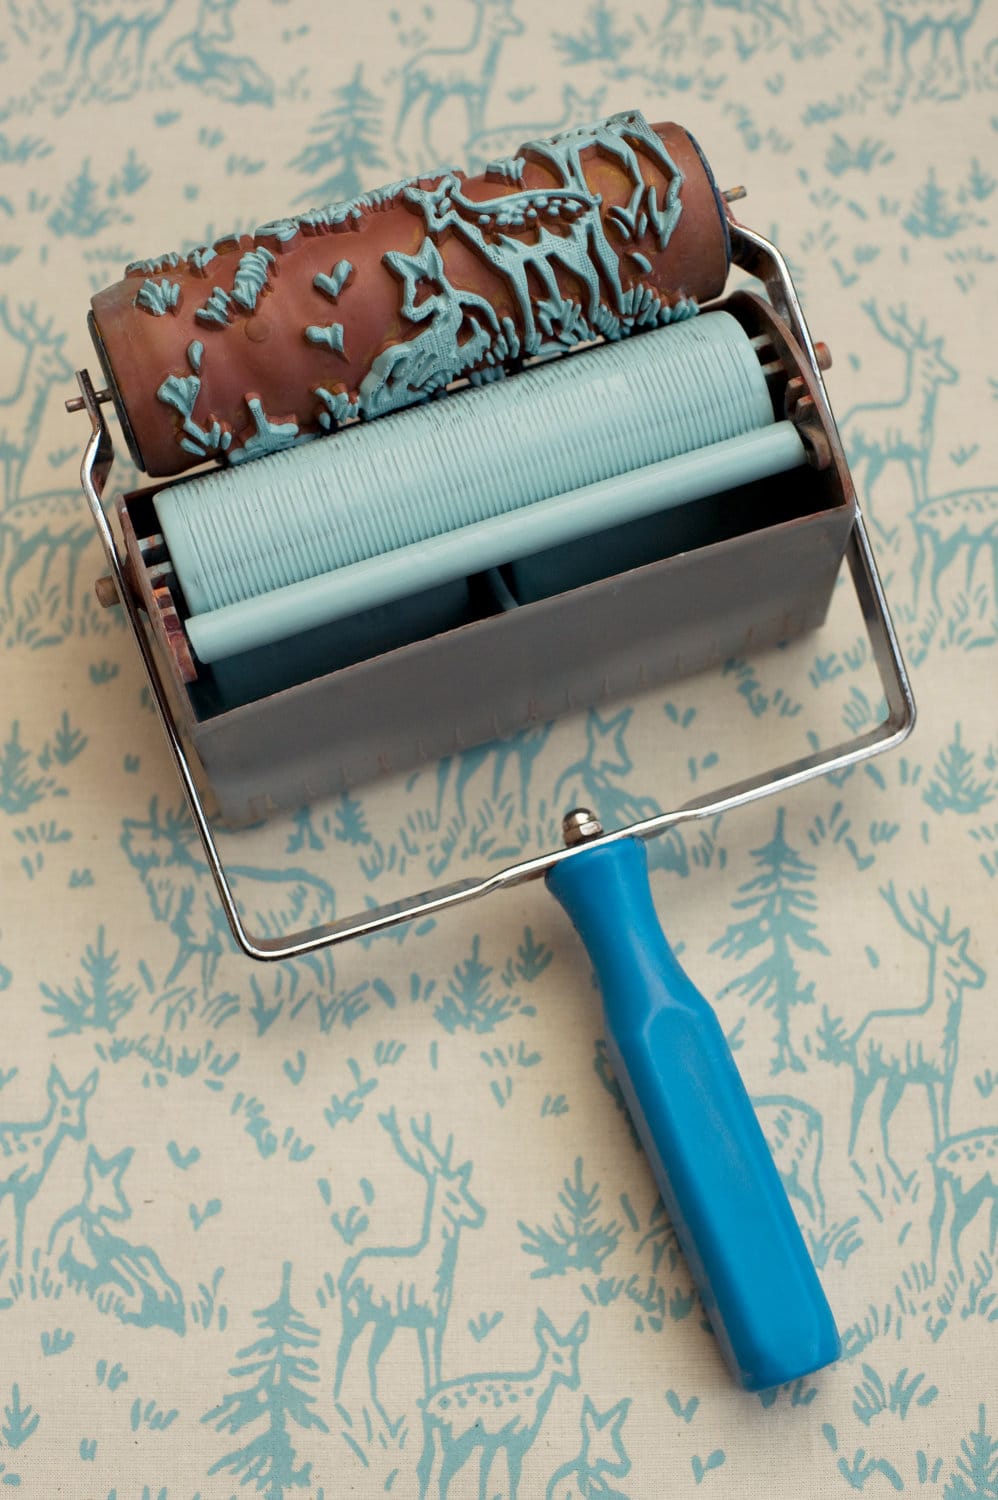 Wallpaper Paint: The Paint Roller That Creates A Wallpaper Look